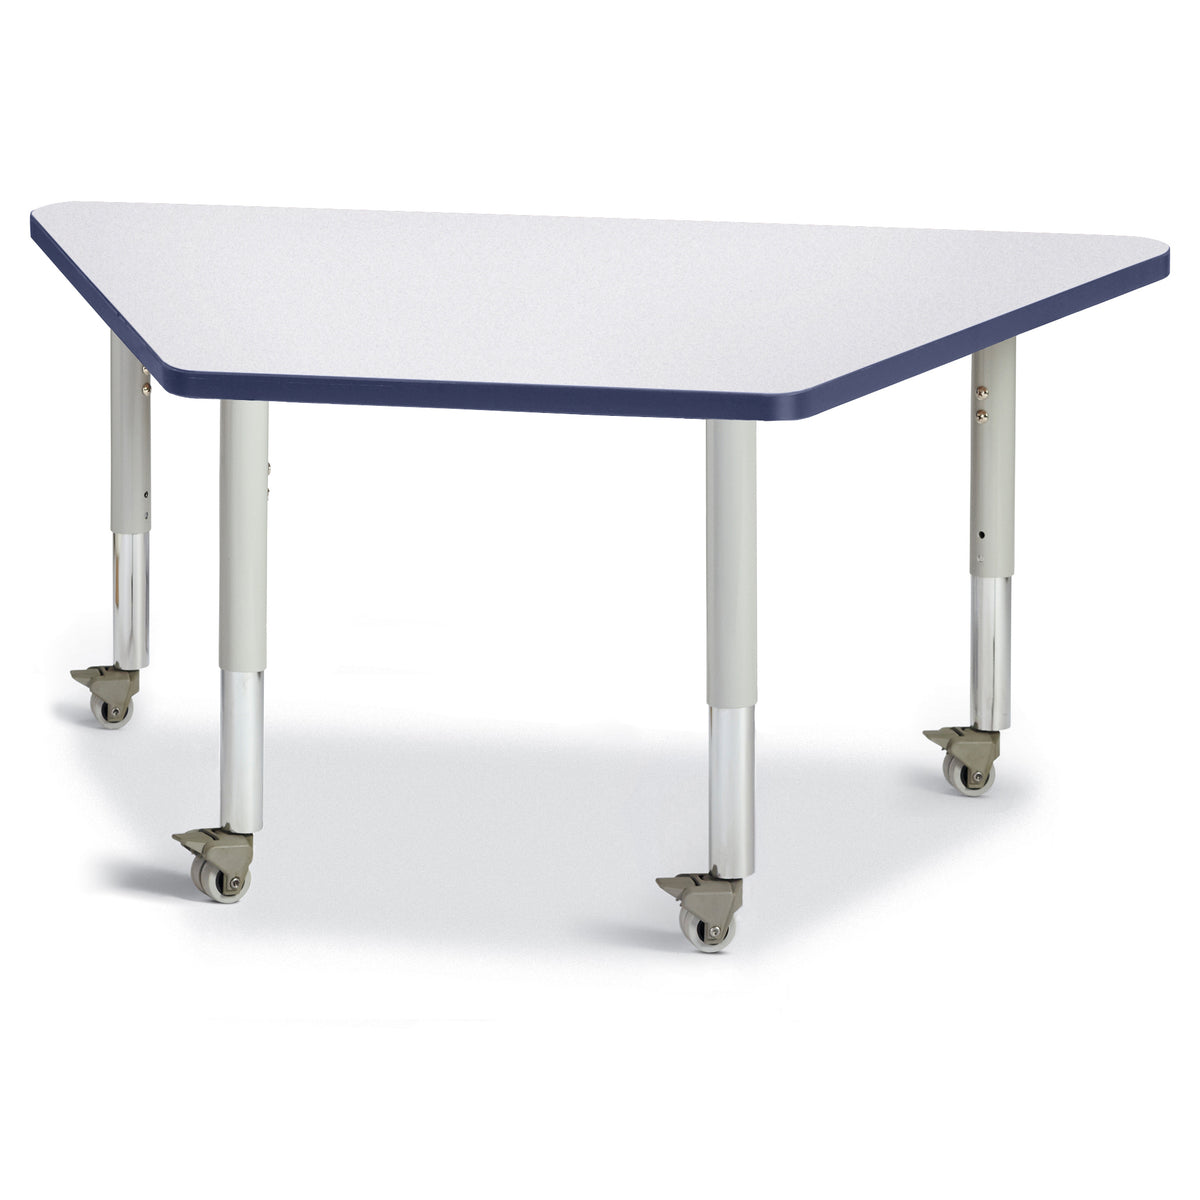 6438JCM112, Berries Trapezoid Activity Tables - 24" X 48", Mobile - Freckled Gray/Navy/Gray